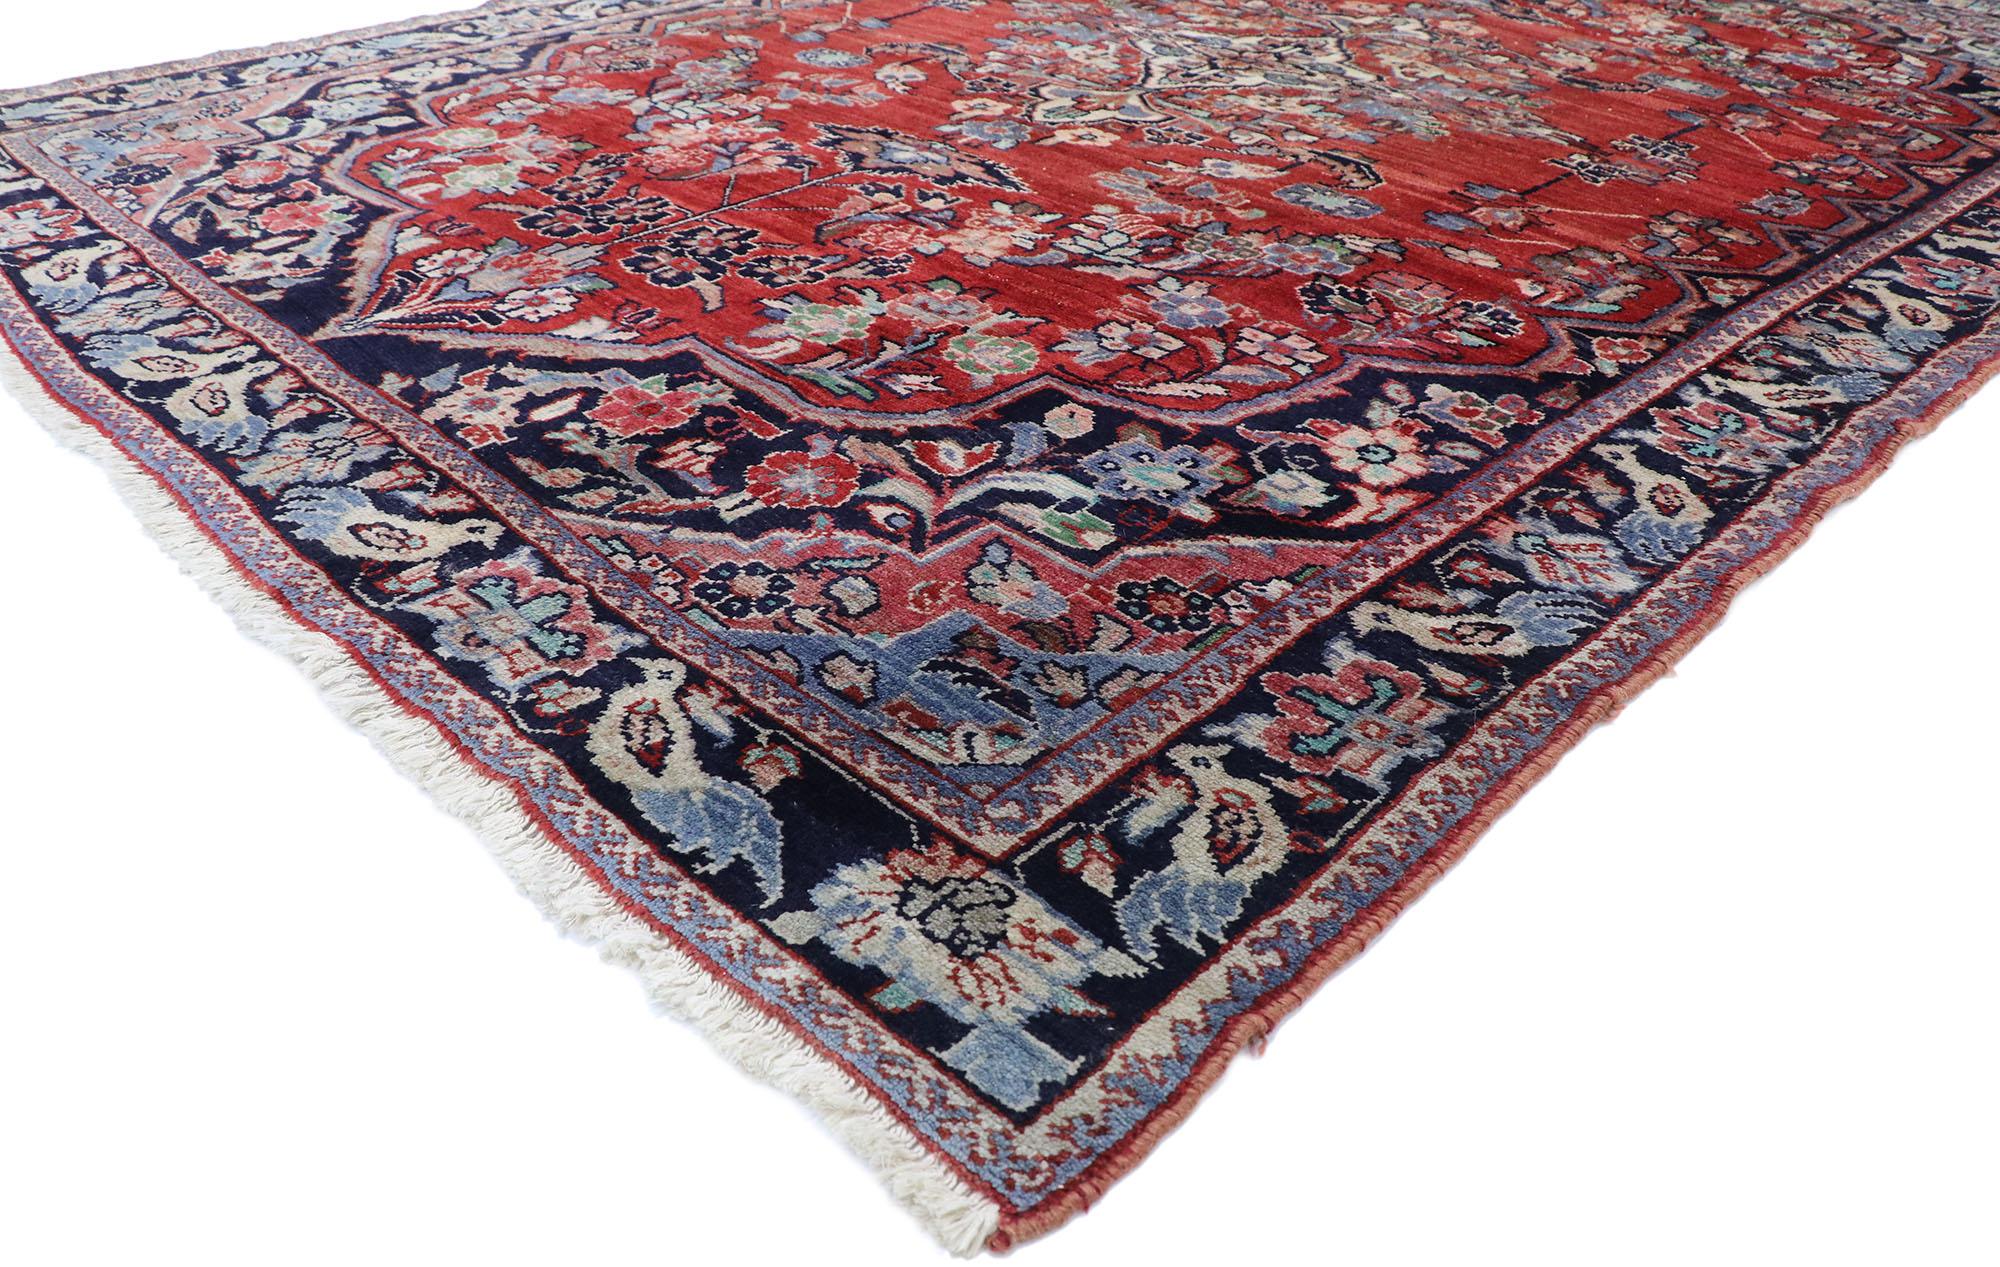 74965 Vintage Persian Mahal Rug with Old World Victorian Style 06’10 x 09’03. Rich in color, texture and beguiling ambiance, this hand knotted wool vintage Persian Mahal rug beautifully displays timeless elegance and regal charm. The abrashed ruby